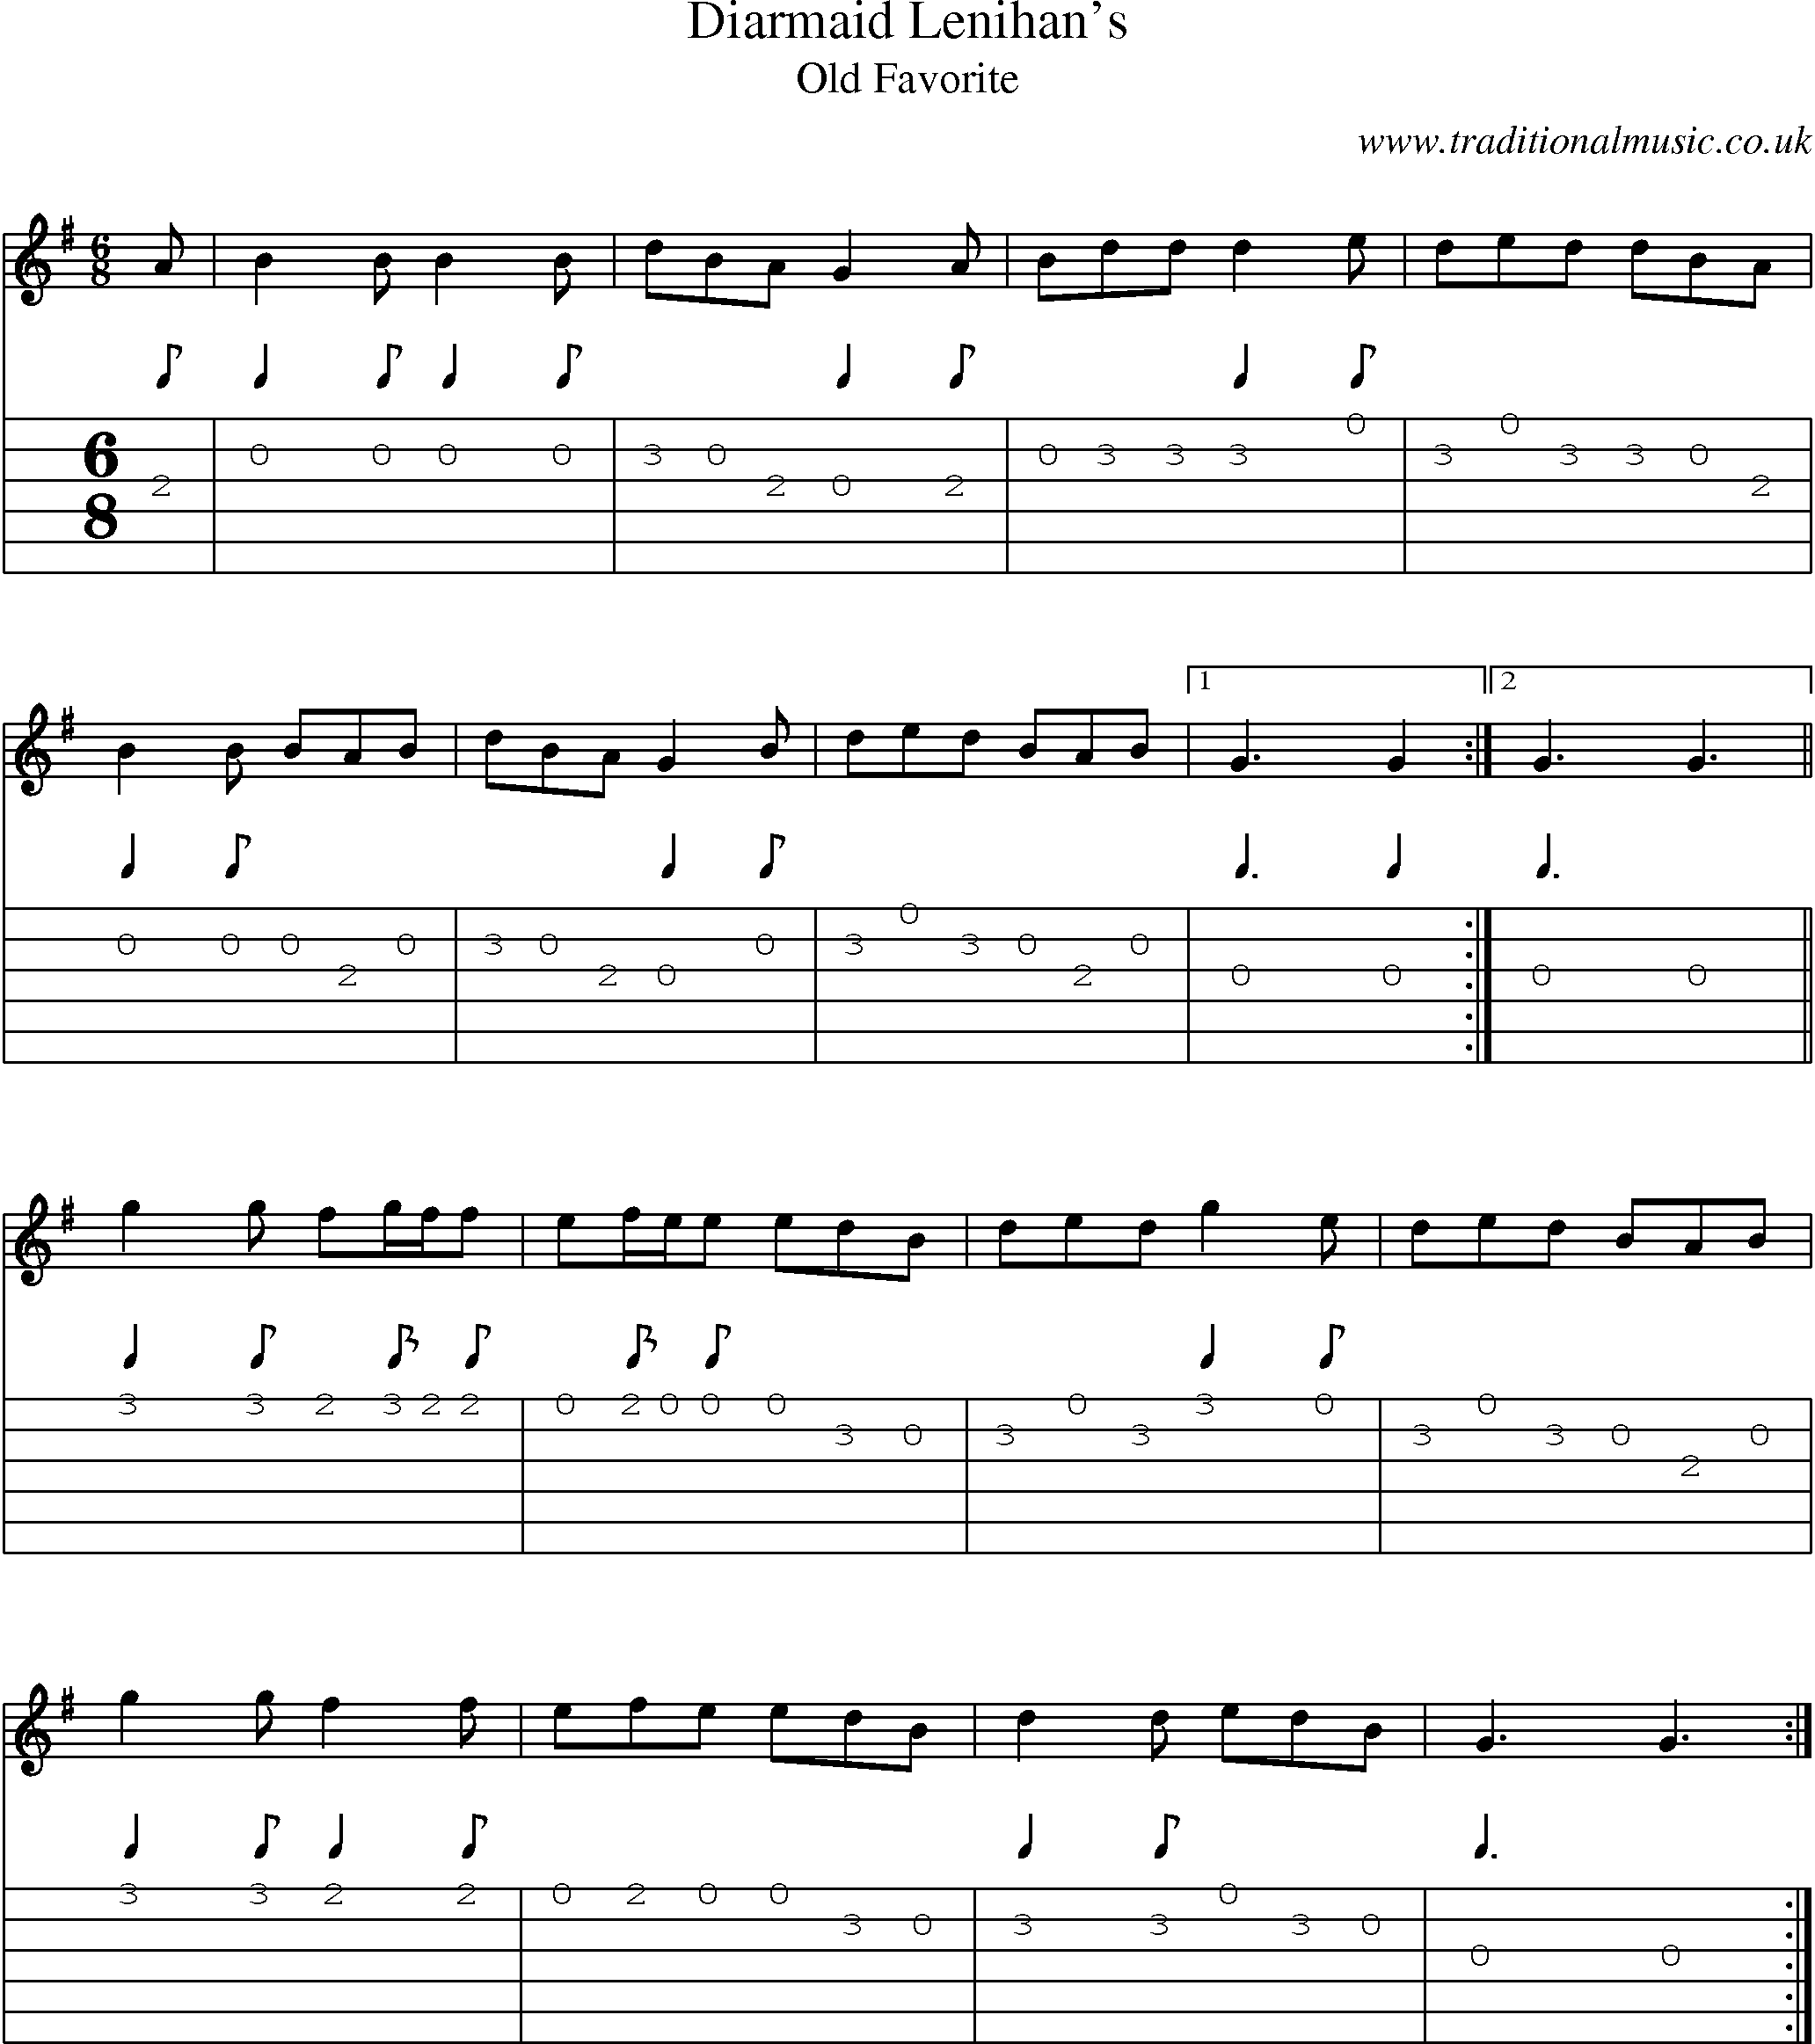 Music Score and Guitar Tabs for Diarmaid Lenihans